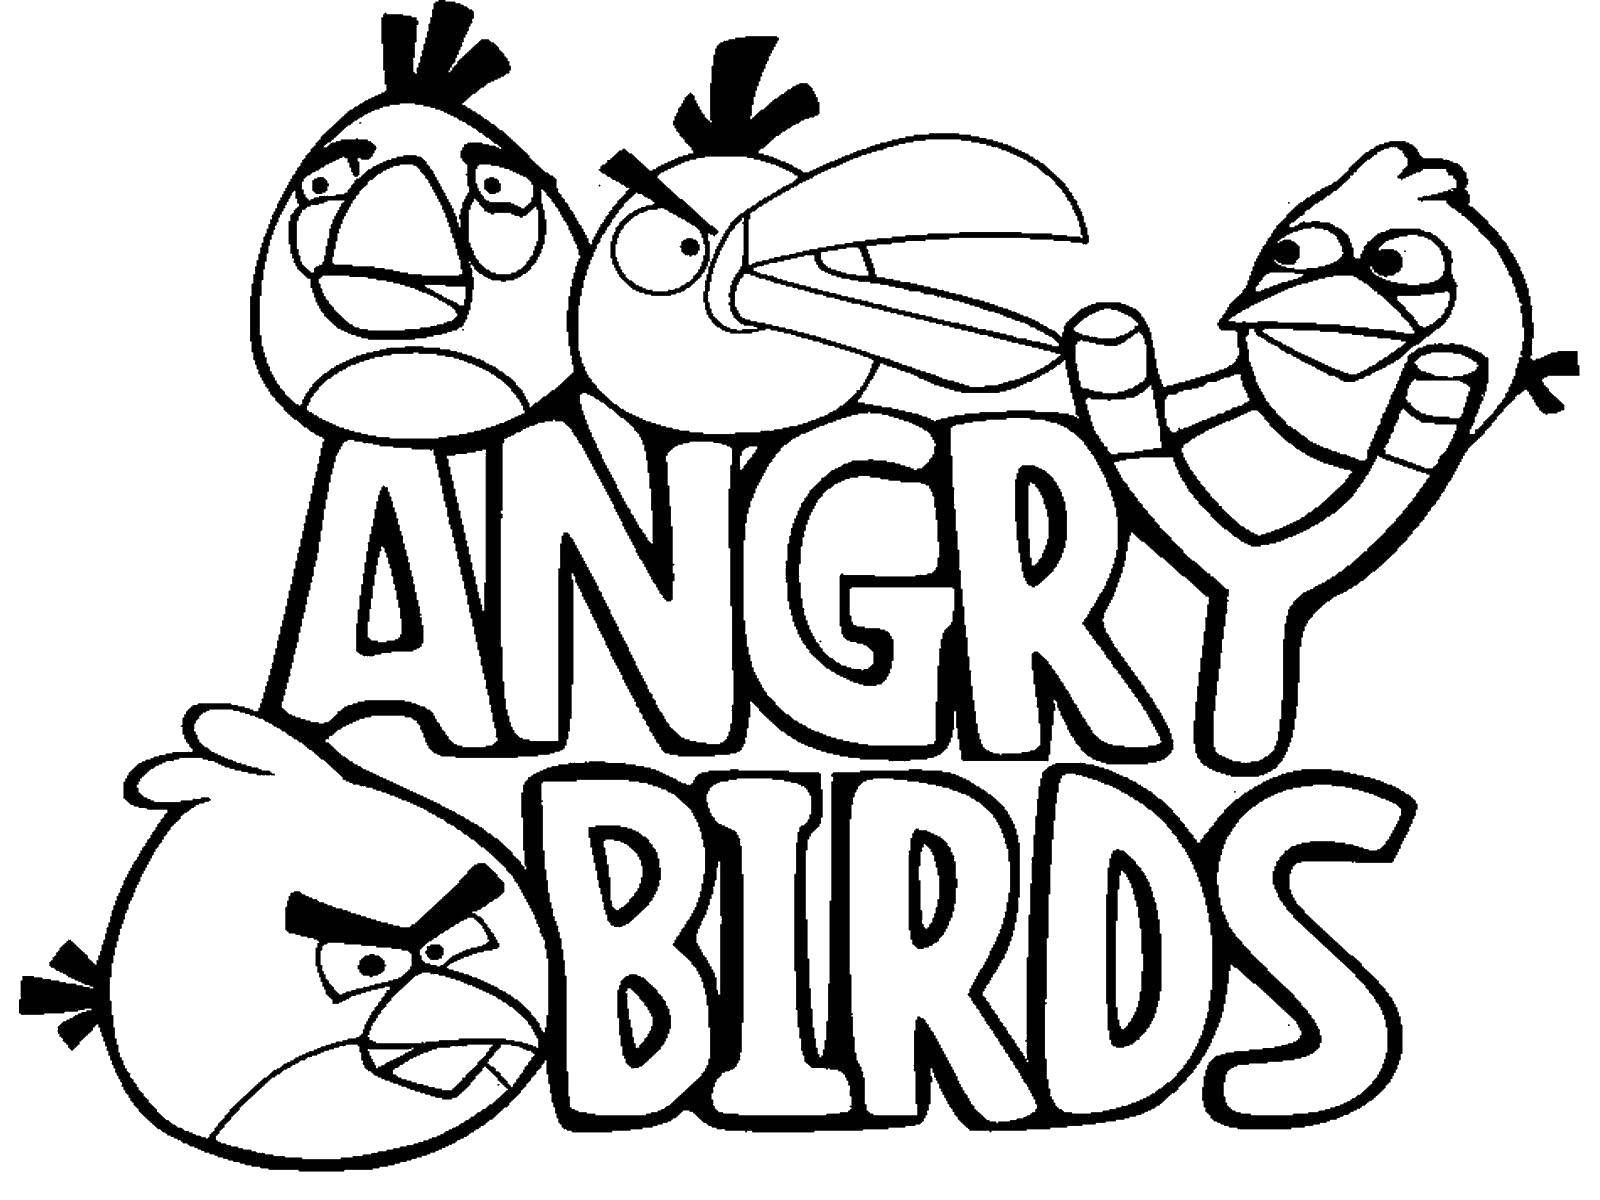 Coloring  angry birds . Category cartoons. Tags:  Games, Angry Birds .